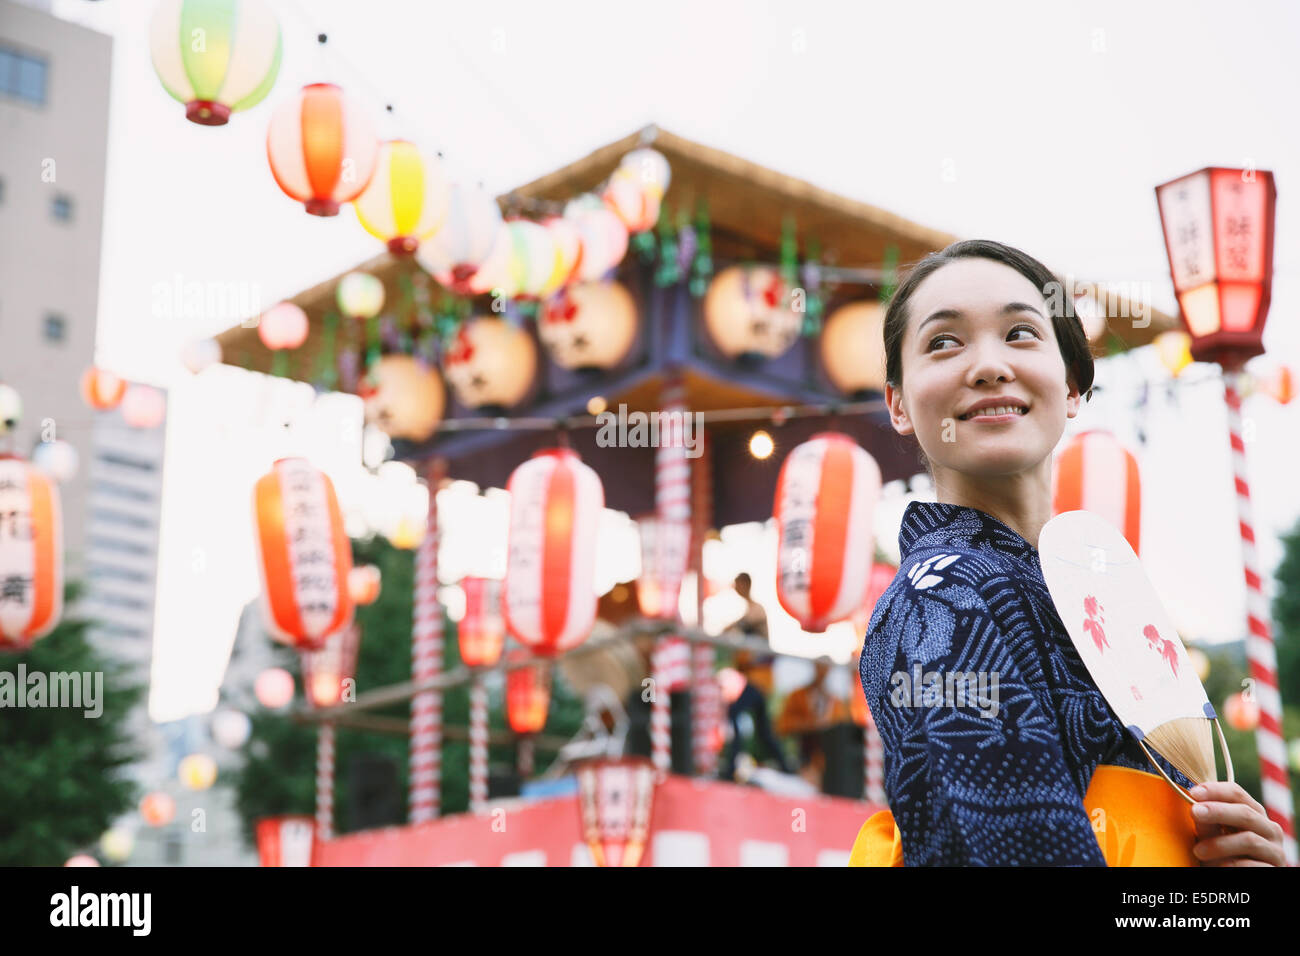 Young Japanese woman in a traditional kimono at a summer festival Stock Photo